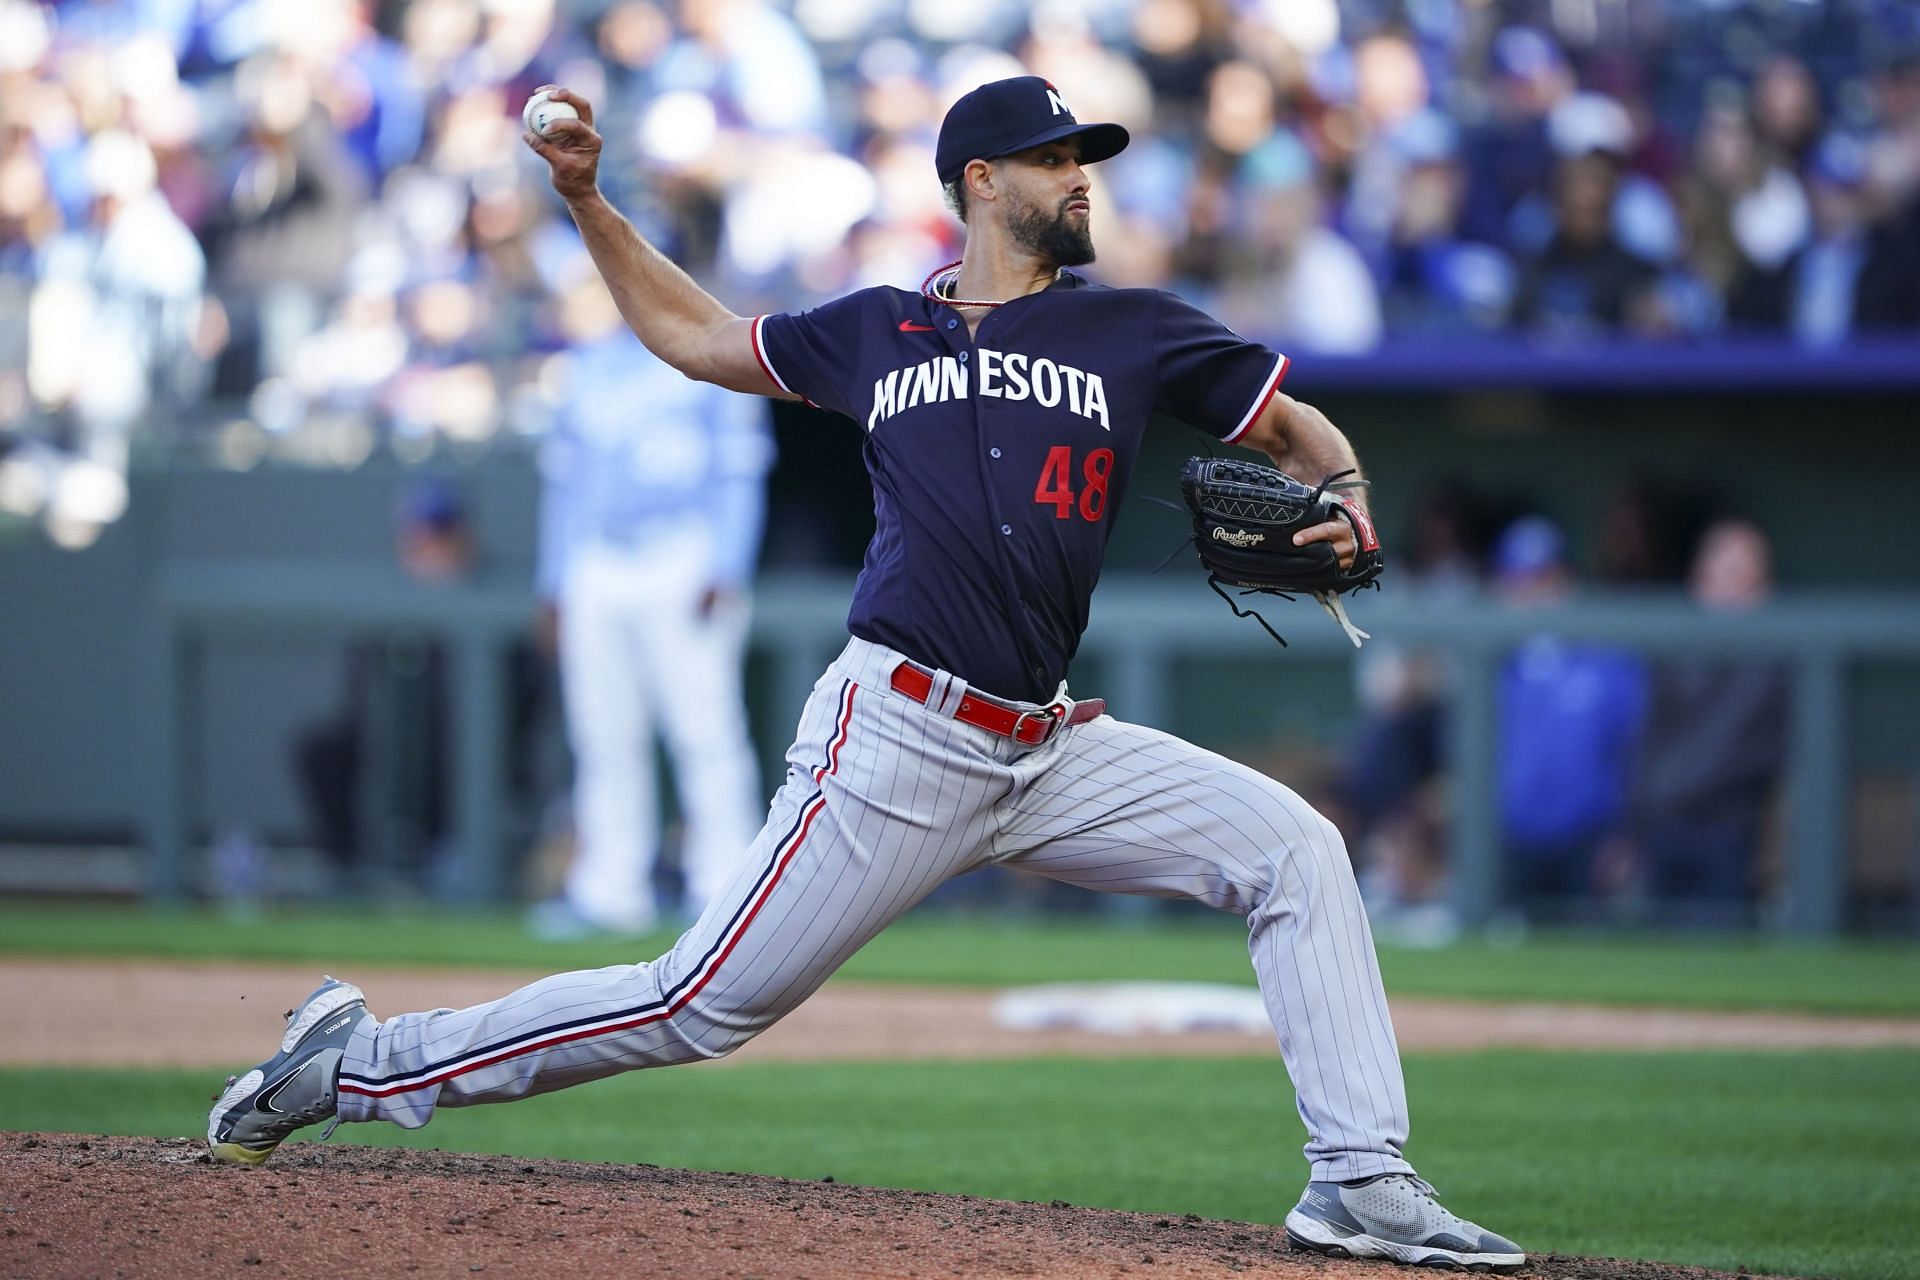 Jorge Lopez of the Minnesota Twins pitches against the Kansas City Royals at Kauffman Stadium